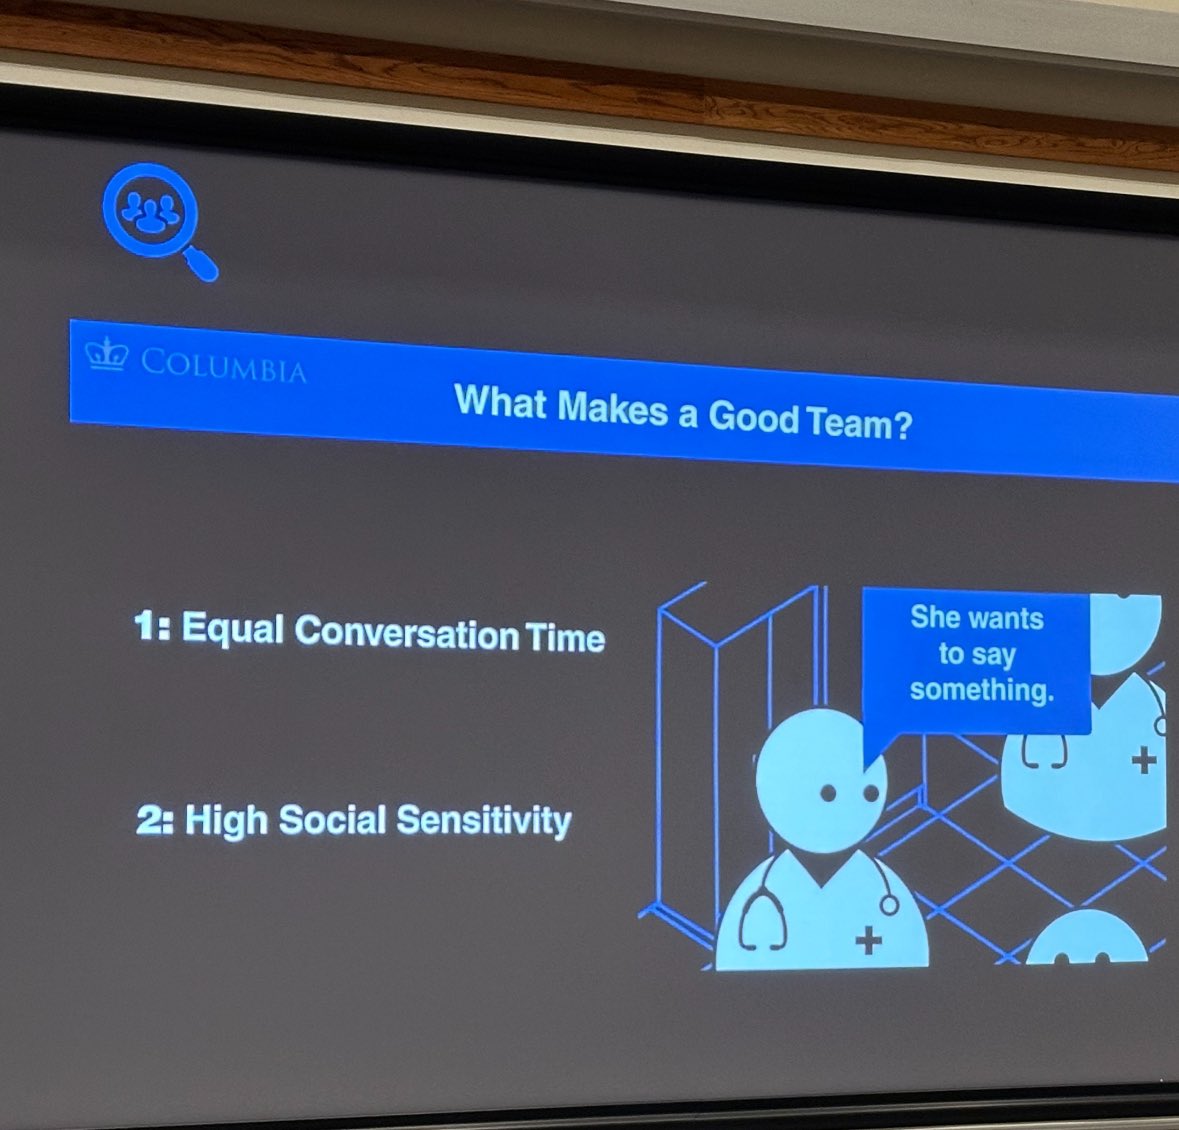 Great wisdom shared from Dr. Vivek Moitra @SCCM_Anesth @SOCCA_CritCare @AbaPhysicians on crisis management, teamwork, situational awareness, cognitive biases and patient safety. High functioning teams listen and have high EQ.